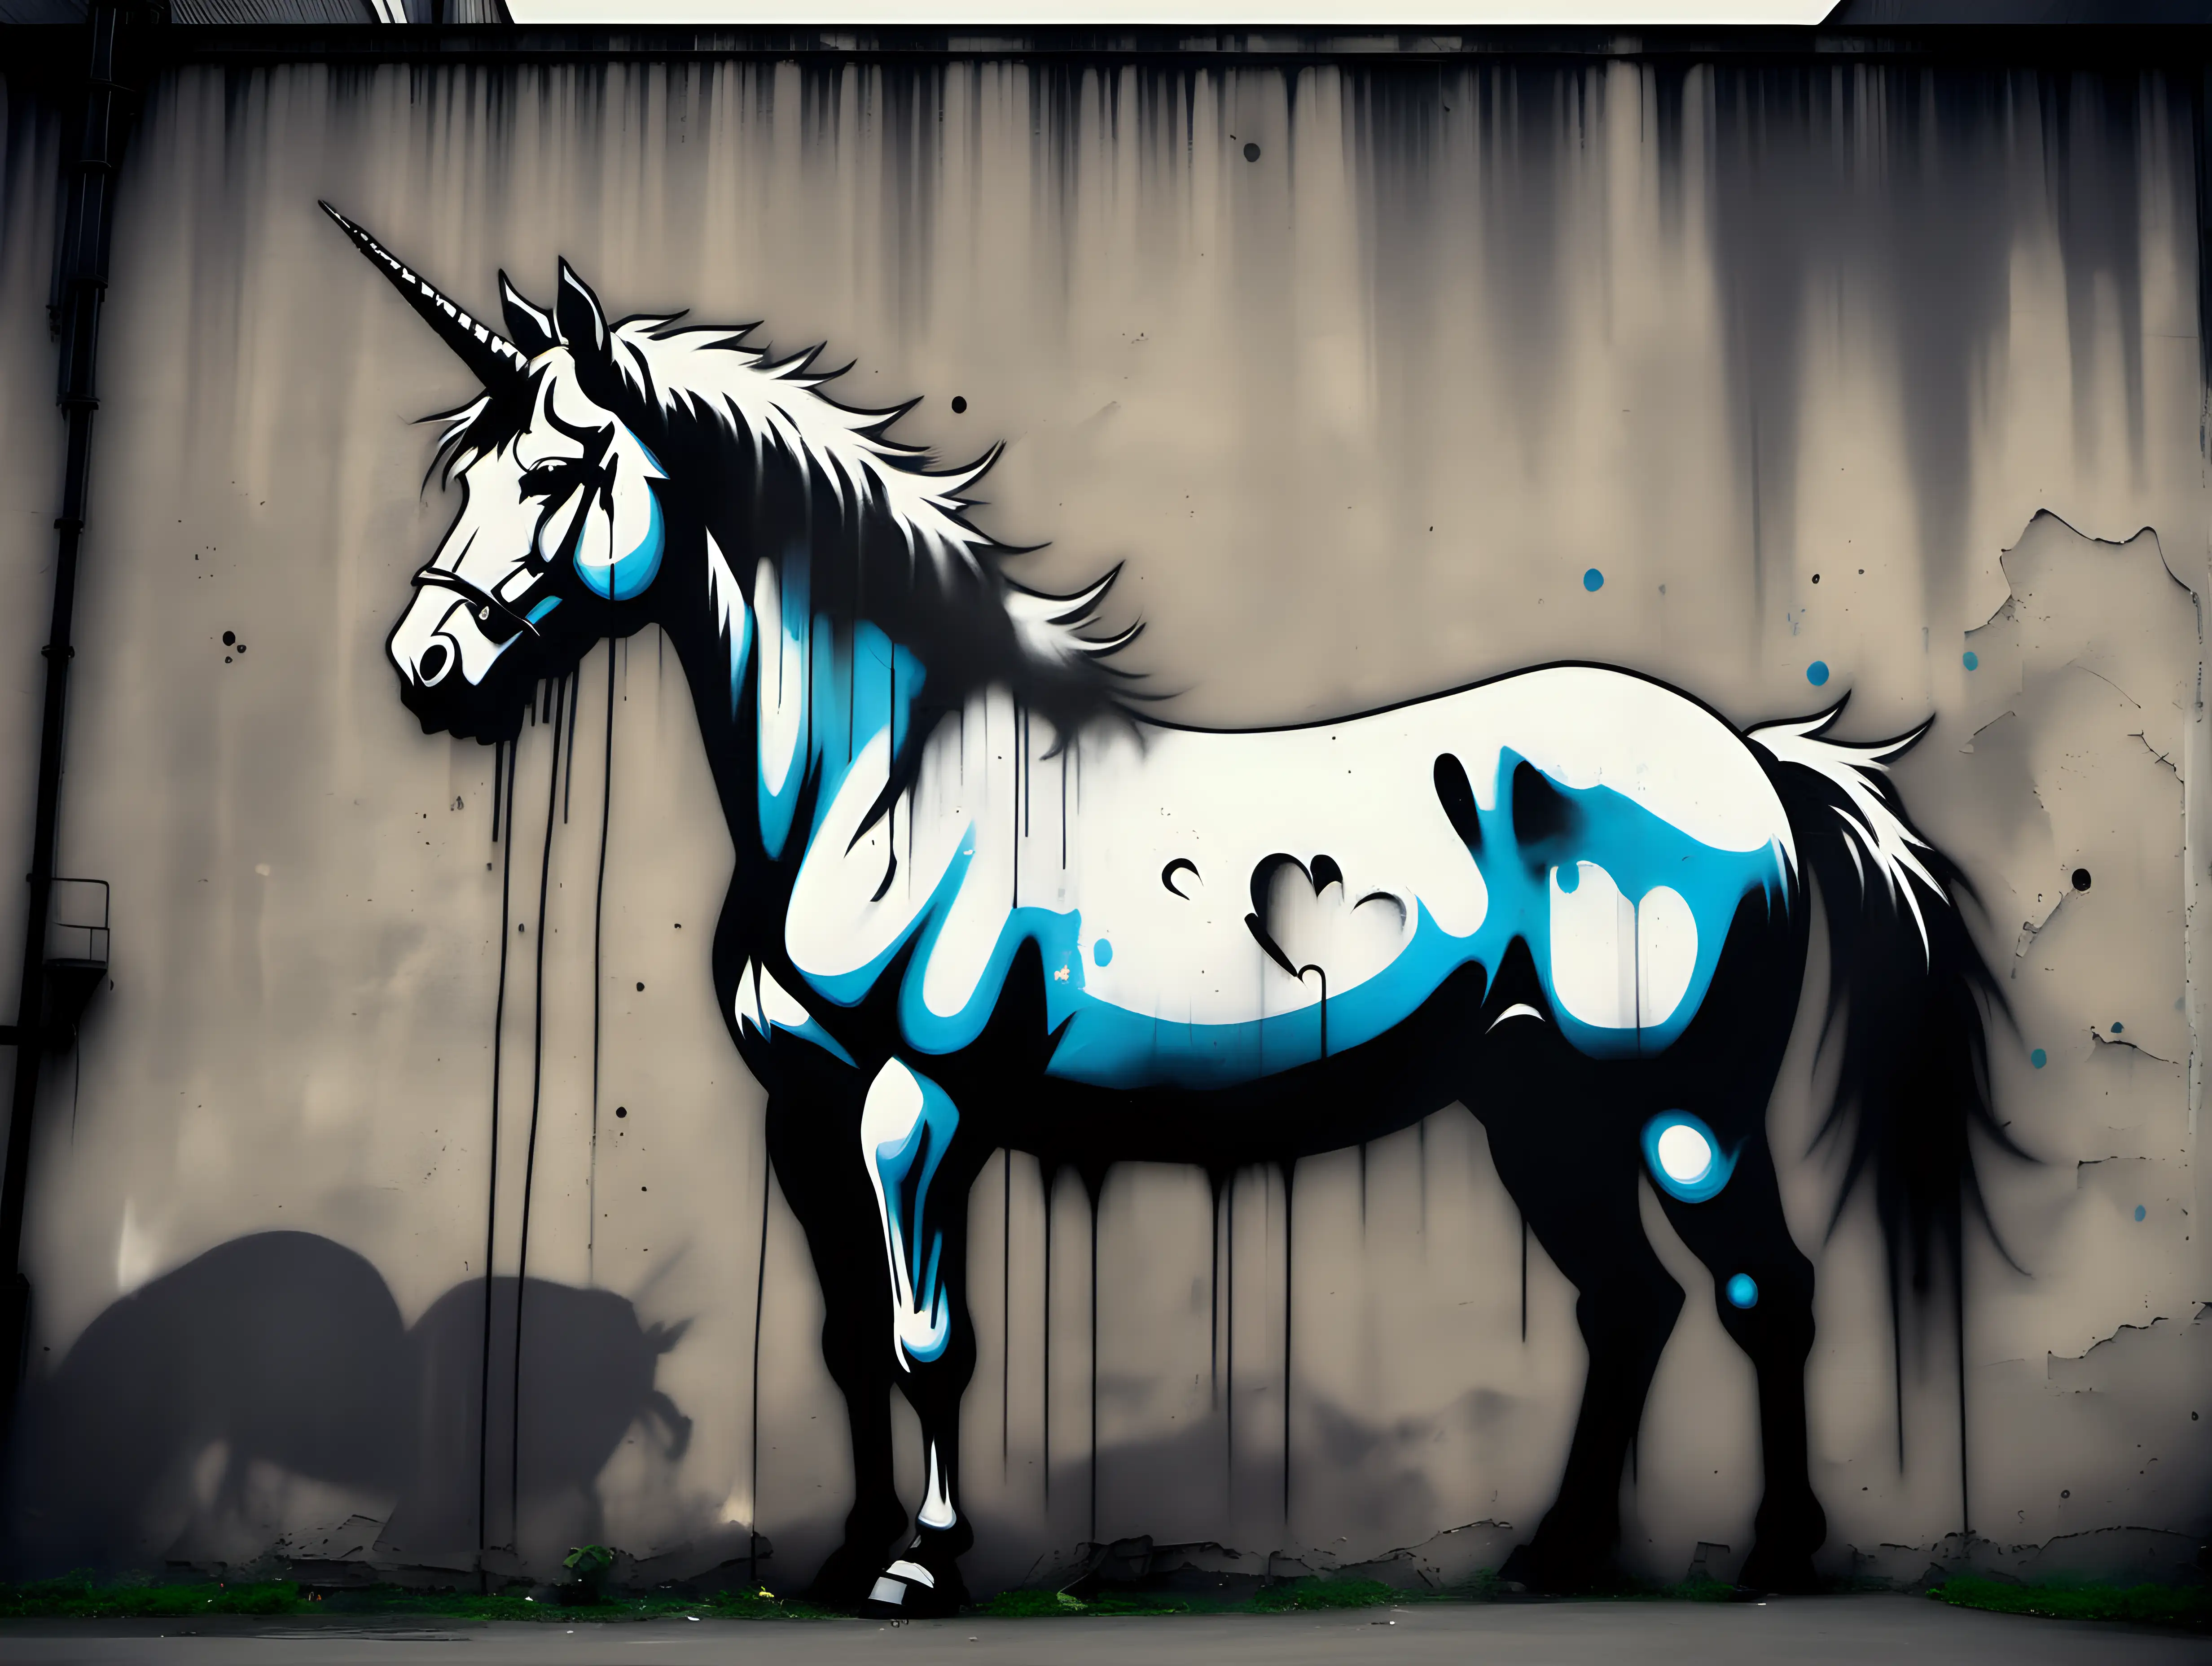 banksy painting on an old dirty wall near a steam factory, wallpainting consists a simple unicorn, toned colors, banksy art banksy signature style